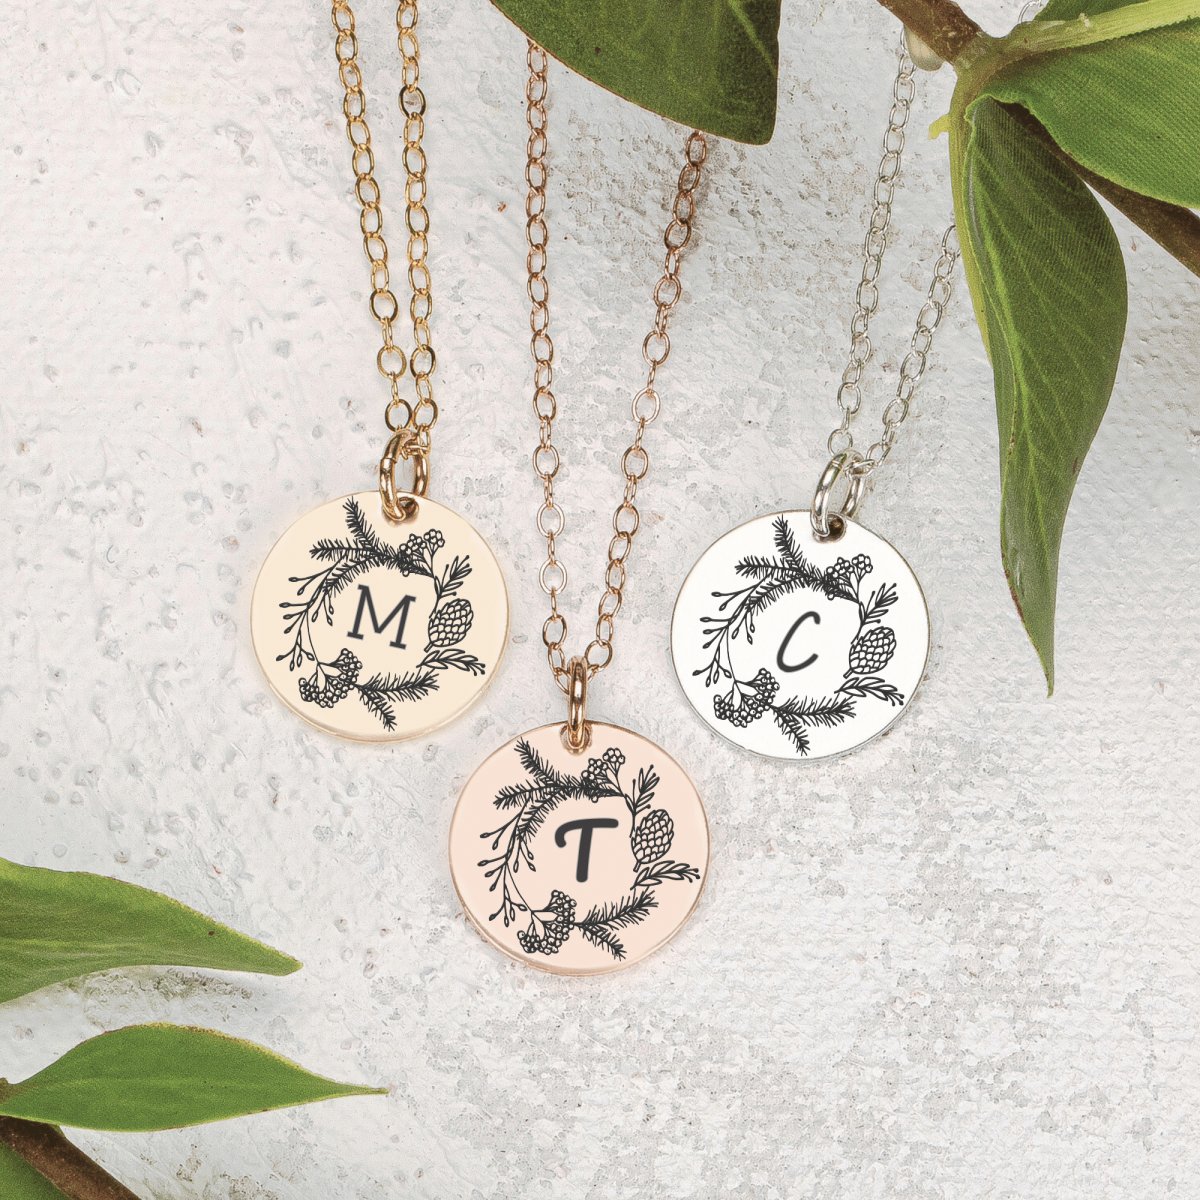 Pine Wreath Initial Necklace - Melanie Golden Jewelry - bridesmaid, custom, disc necklaces, Engraved Jewelry, flora, love, motherhood, necklace, necklaces, personalized, personalized necklace, VALENTINES, wedding, wedding party